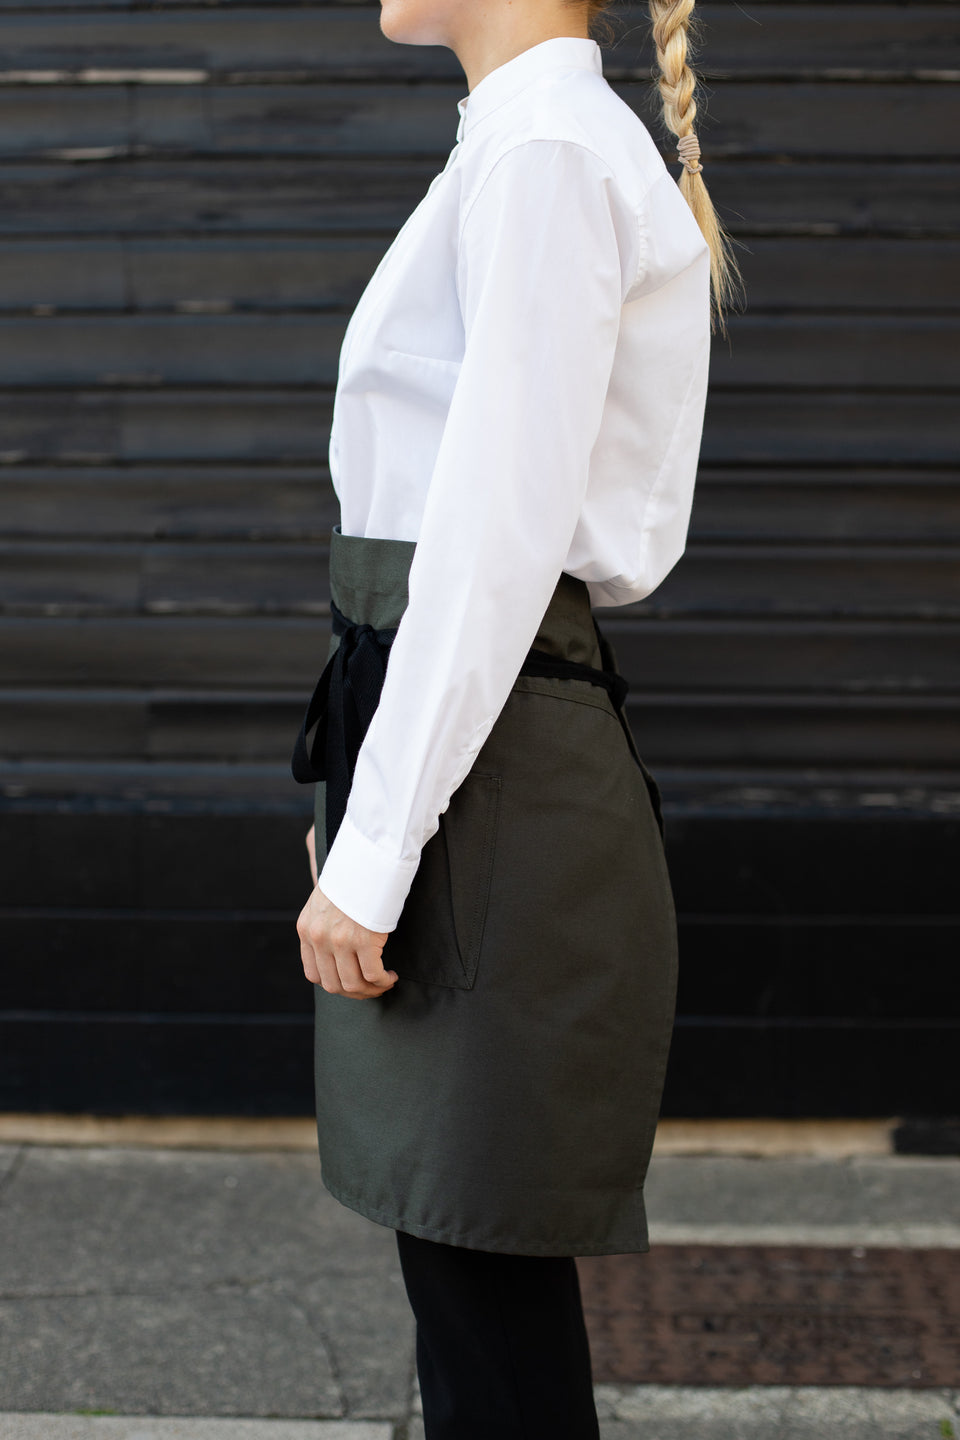 LOT 07: Olive Waist Apron with Curved Pockets | Regular